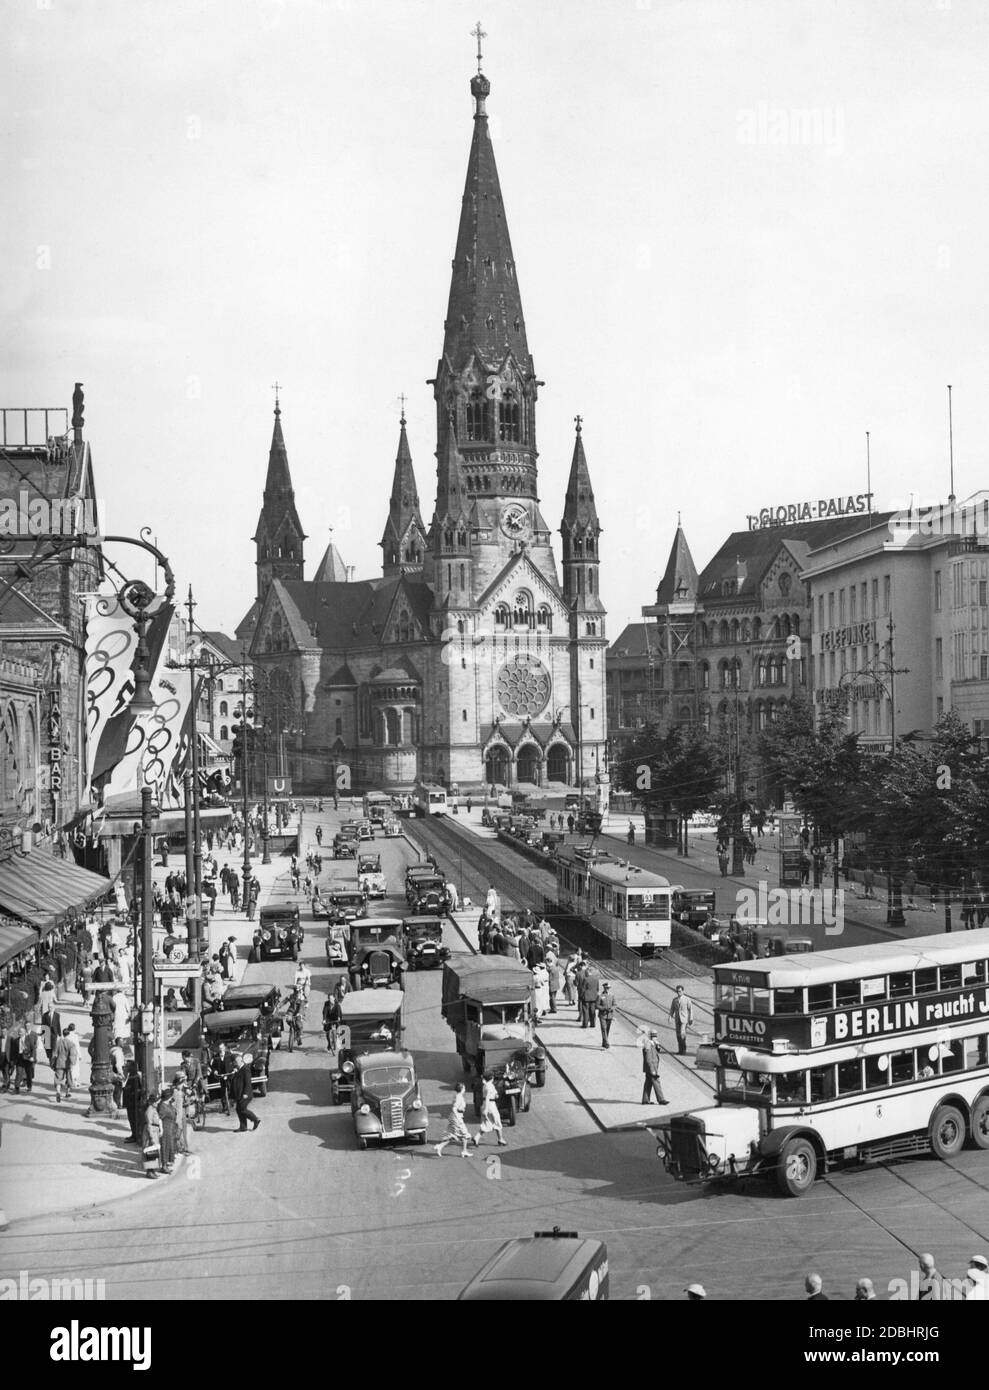 'The photograph shows the Kaiser Wilhelm Memorial Church in Berlin at the time of the Olympic Games in 1936, with the hustle and bustle of the Hardenbergstrasse, at the intersection with Joachimsthaler Strasse, in the foreground. To the right in front of the church is the Romanisches Haus with the Gloria-Palast, next to it is a slogan ''Telefunken - Die Deutsche Weltmarke'' (''Telefunken - The German World Brand''). On the left is the Haus Germania and the Ufa-Palast am Zoo. A double-decker bus of line 20 to ''Knie'' with the advertisement ''Berlin raucht JUNO'' (''Berlin smokes JUNO'') Stock Photo